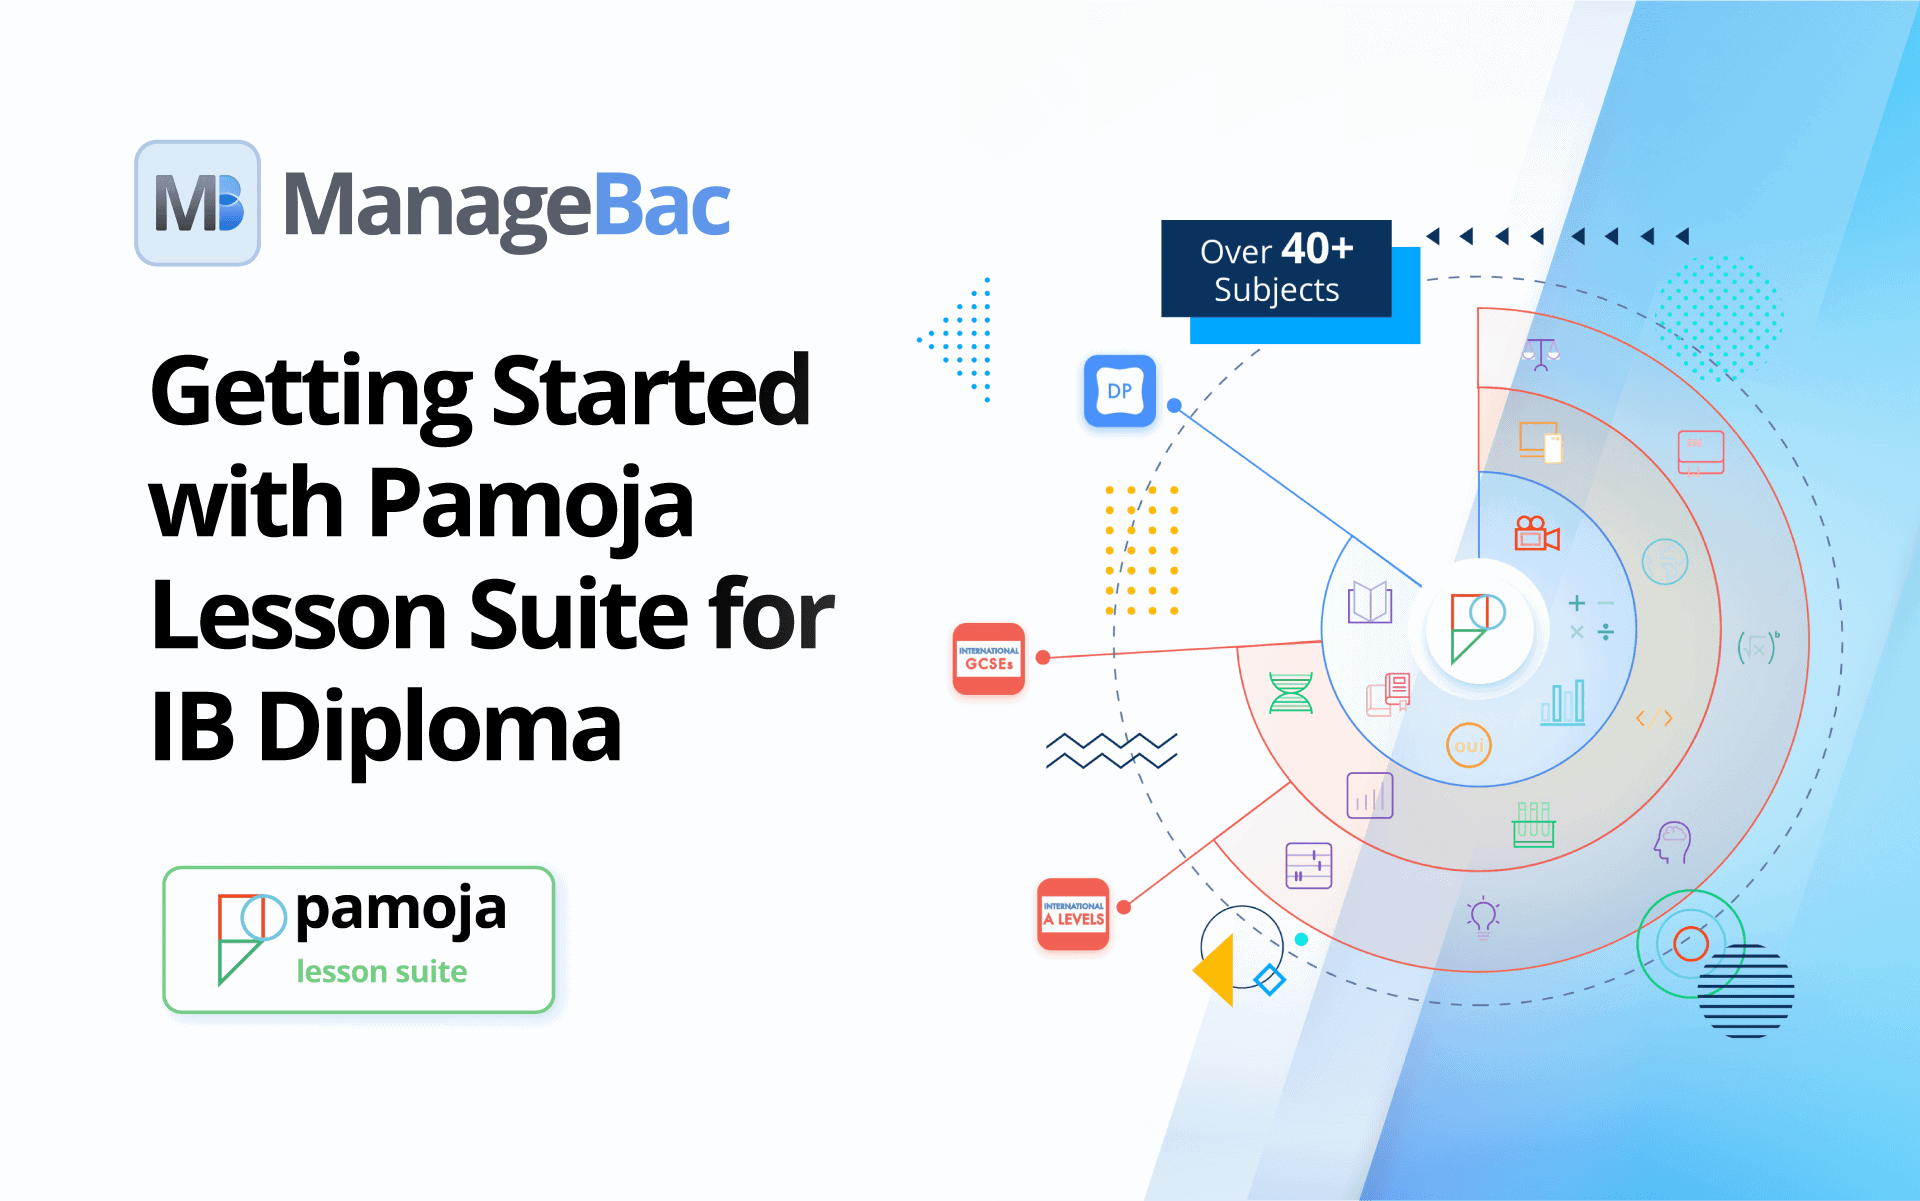 Getting Started with Pamoja Lesson Suite for the IB Diploma